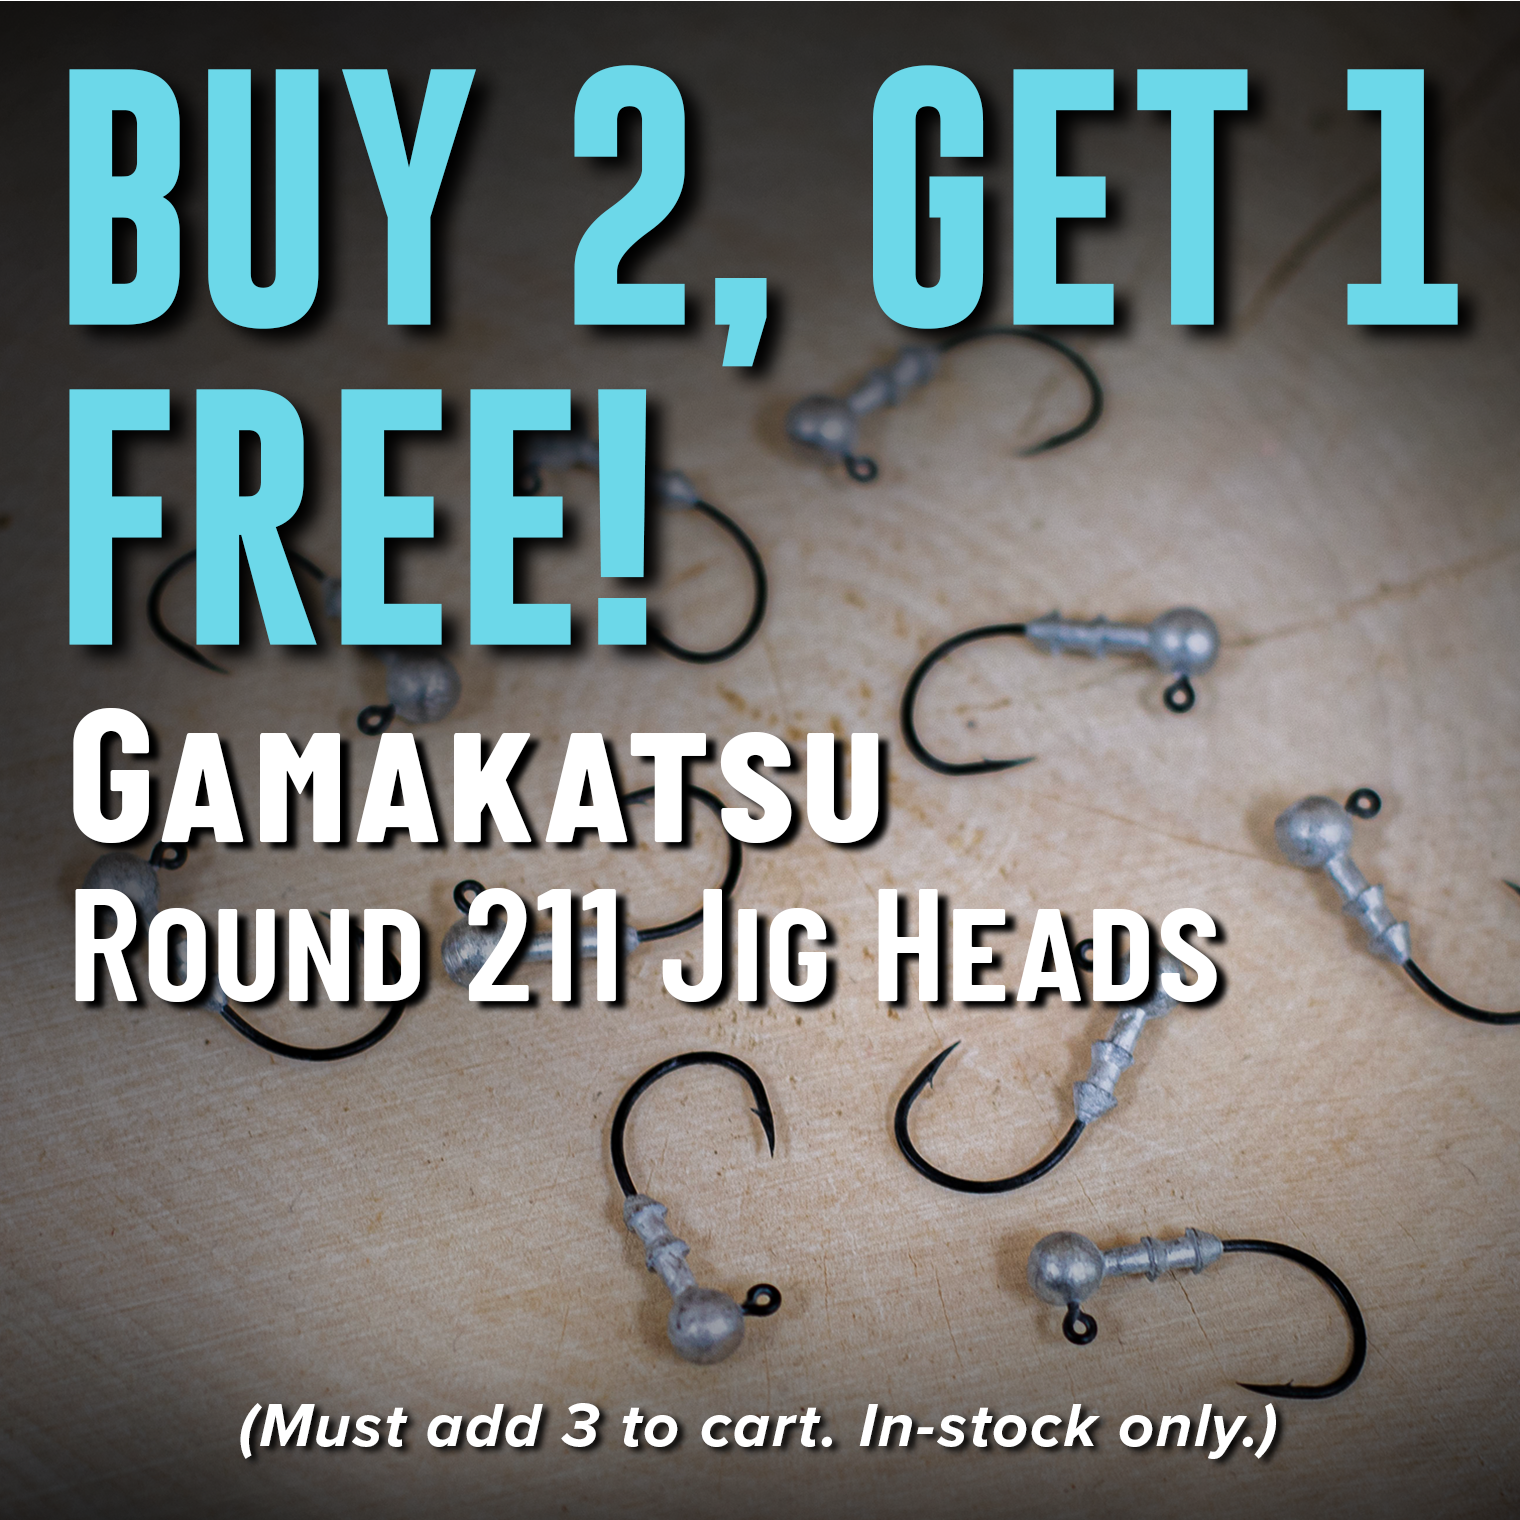 Buy 2, Get 1 Free! Gamakatsu Round 211 Jig Heads (Must add 3 to cart. In-stock only.)